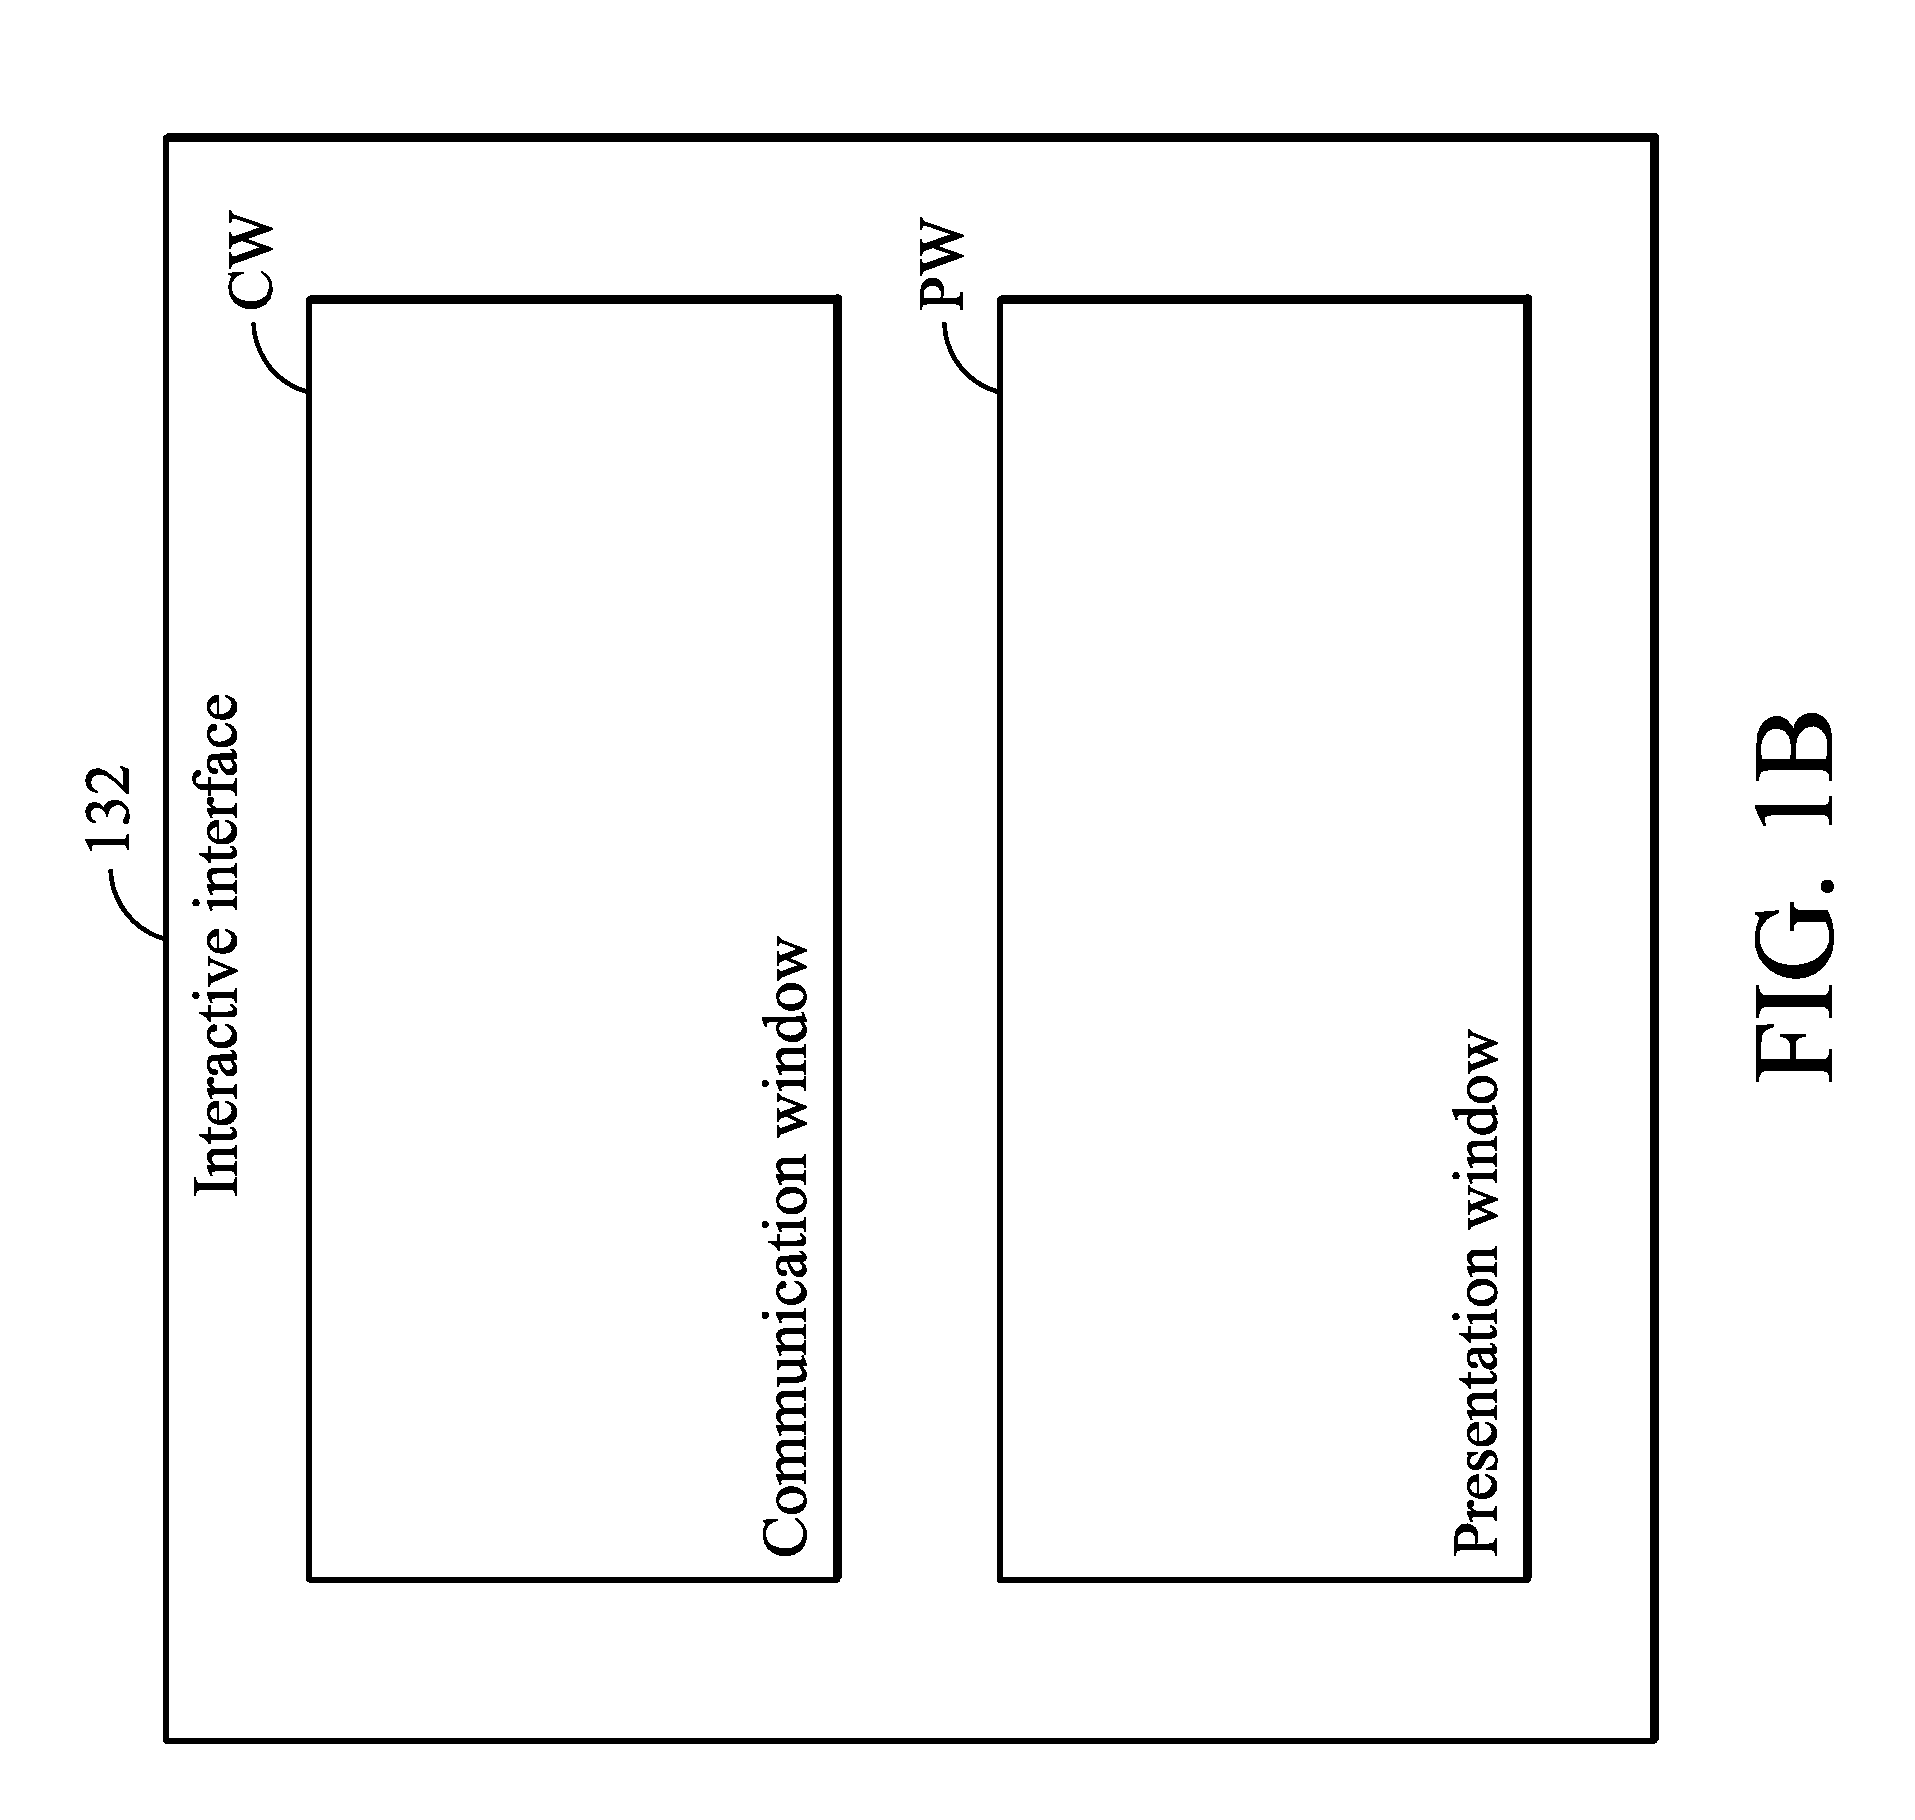 Instant data sharing system and machine readable medium thereof